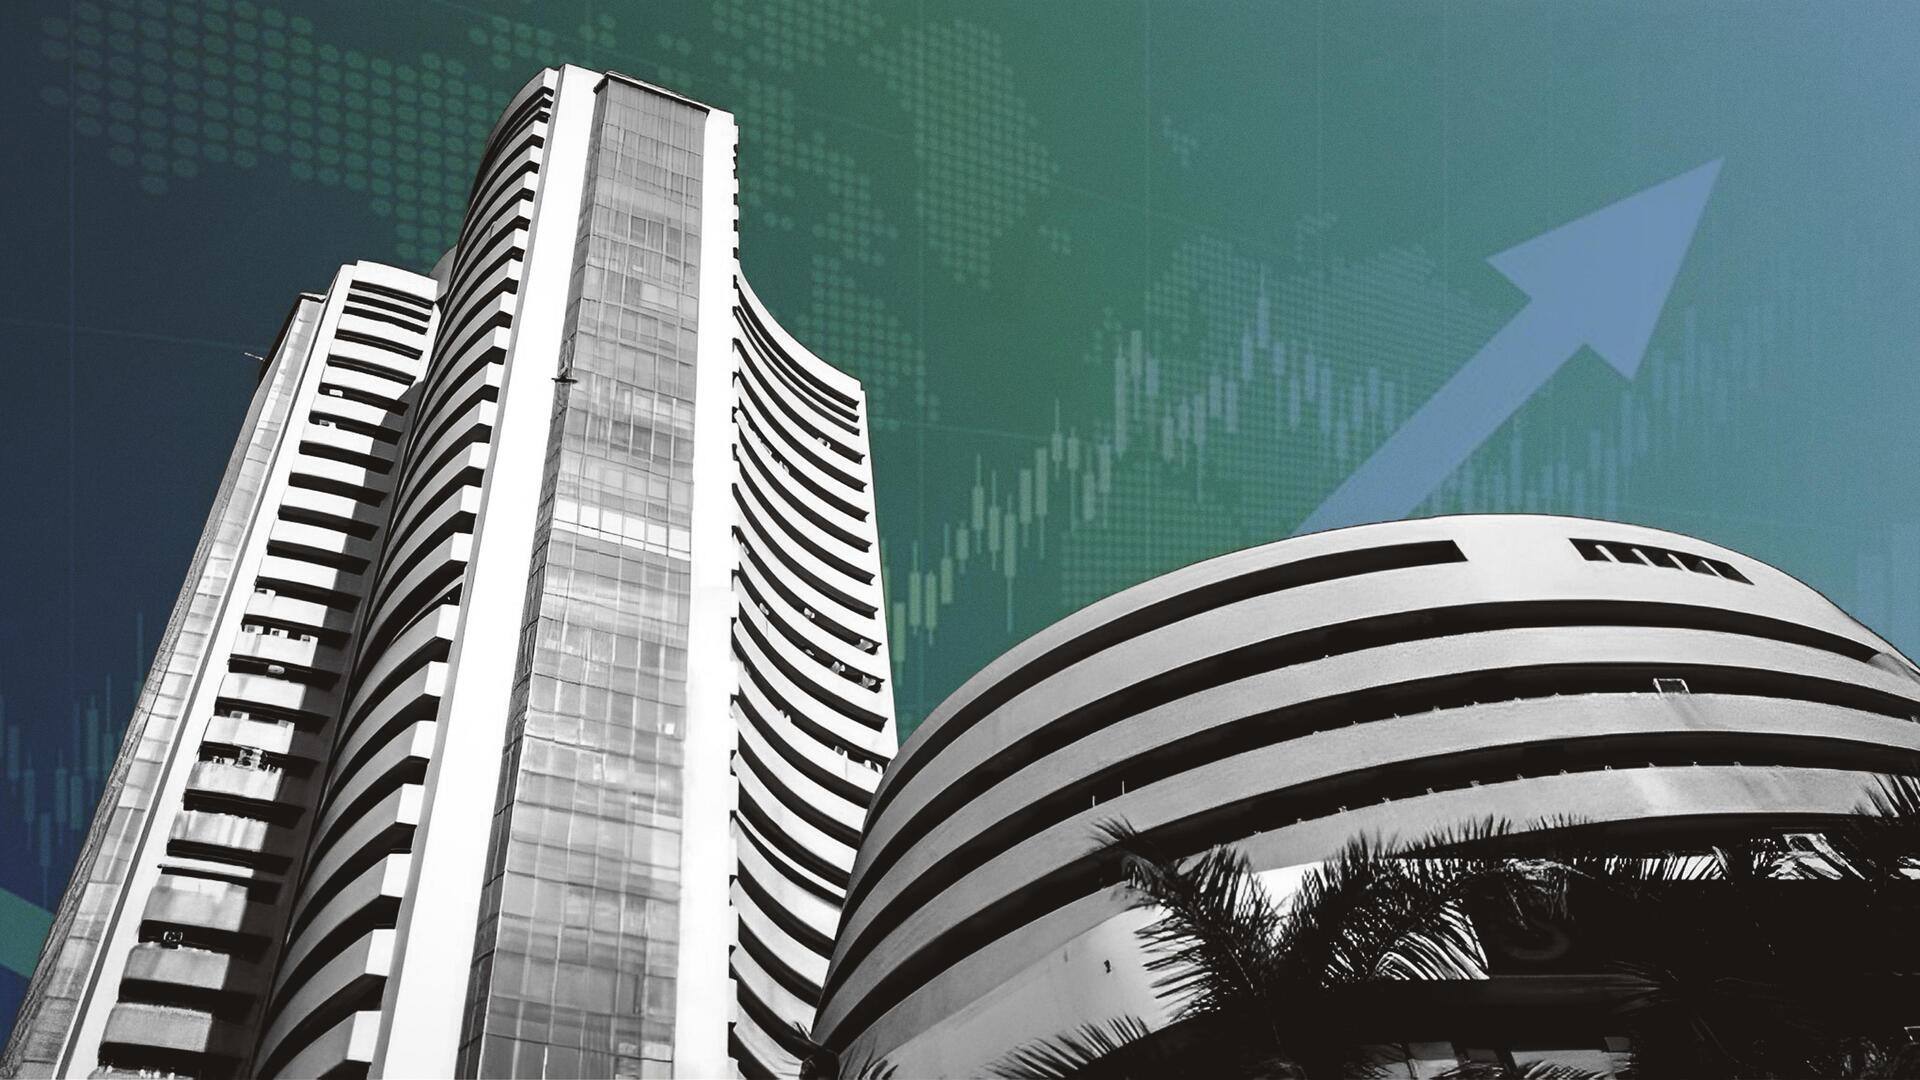 Sensex gains 528 points, Nifty records new all-time high